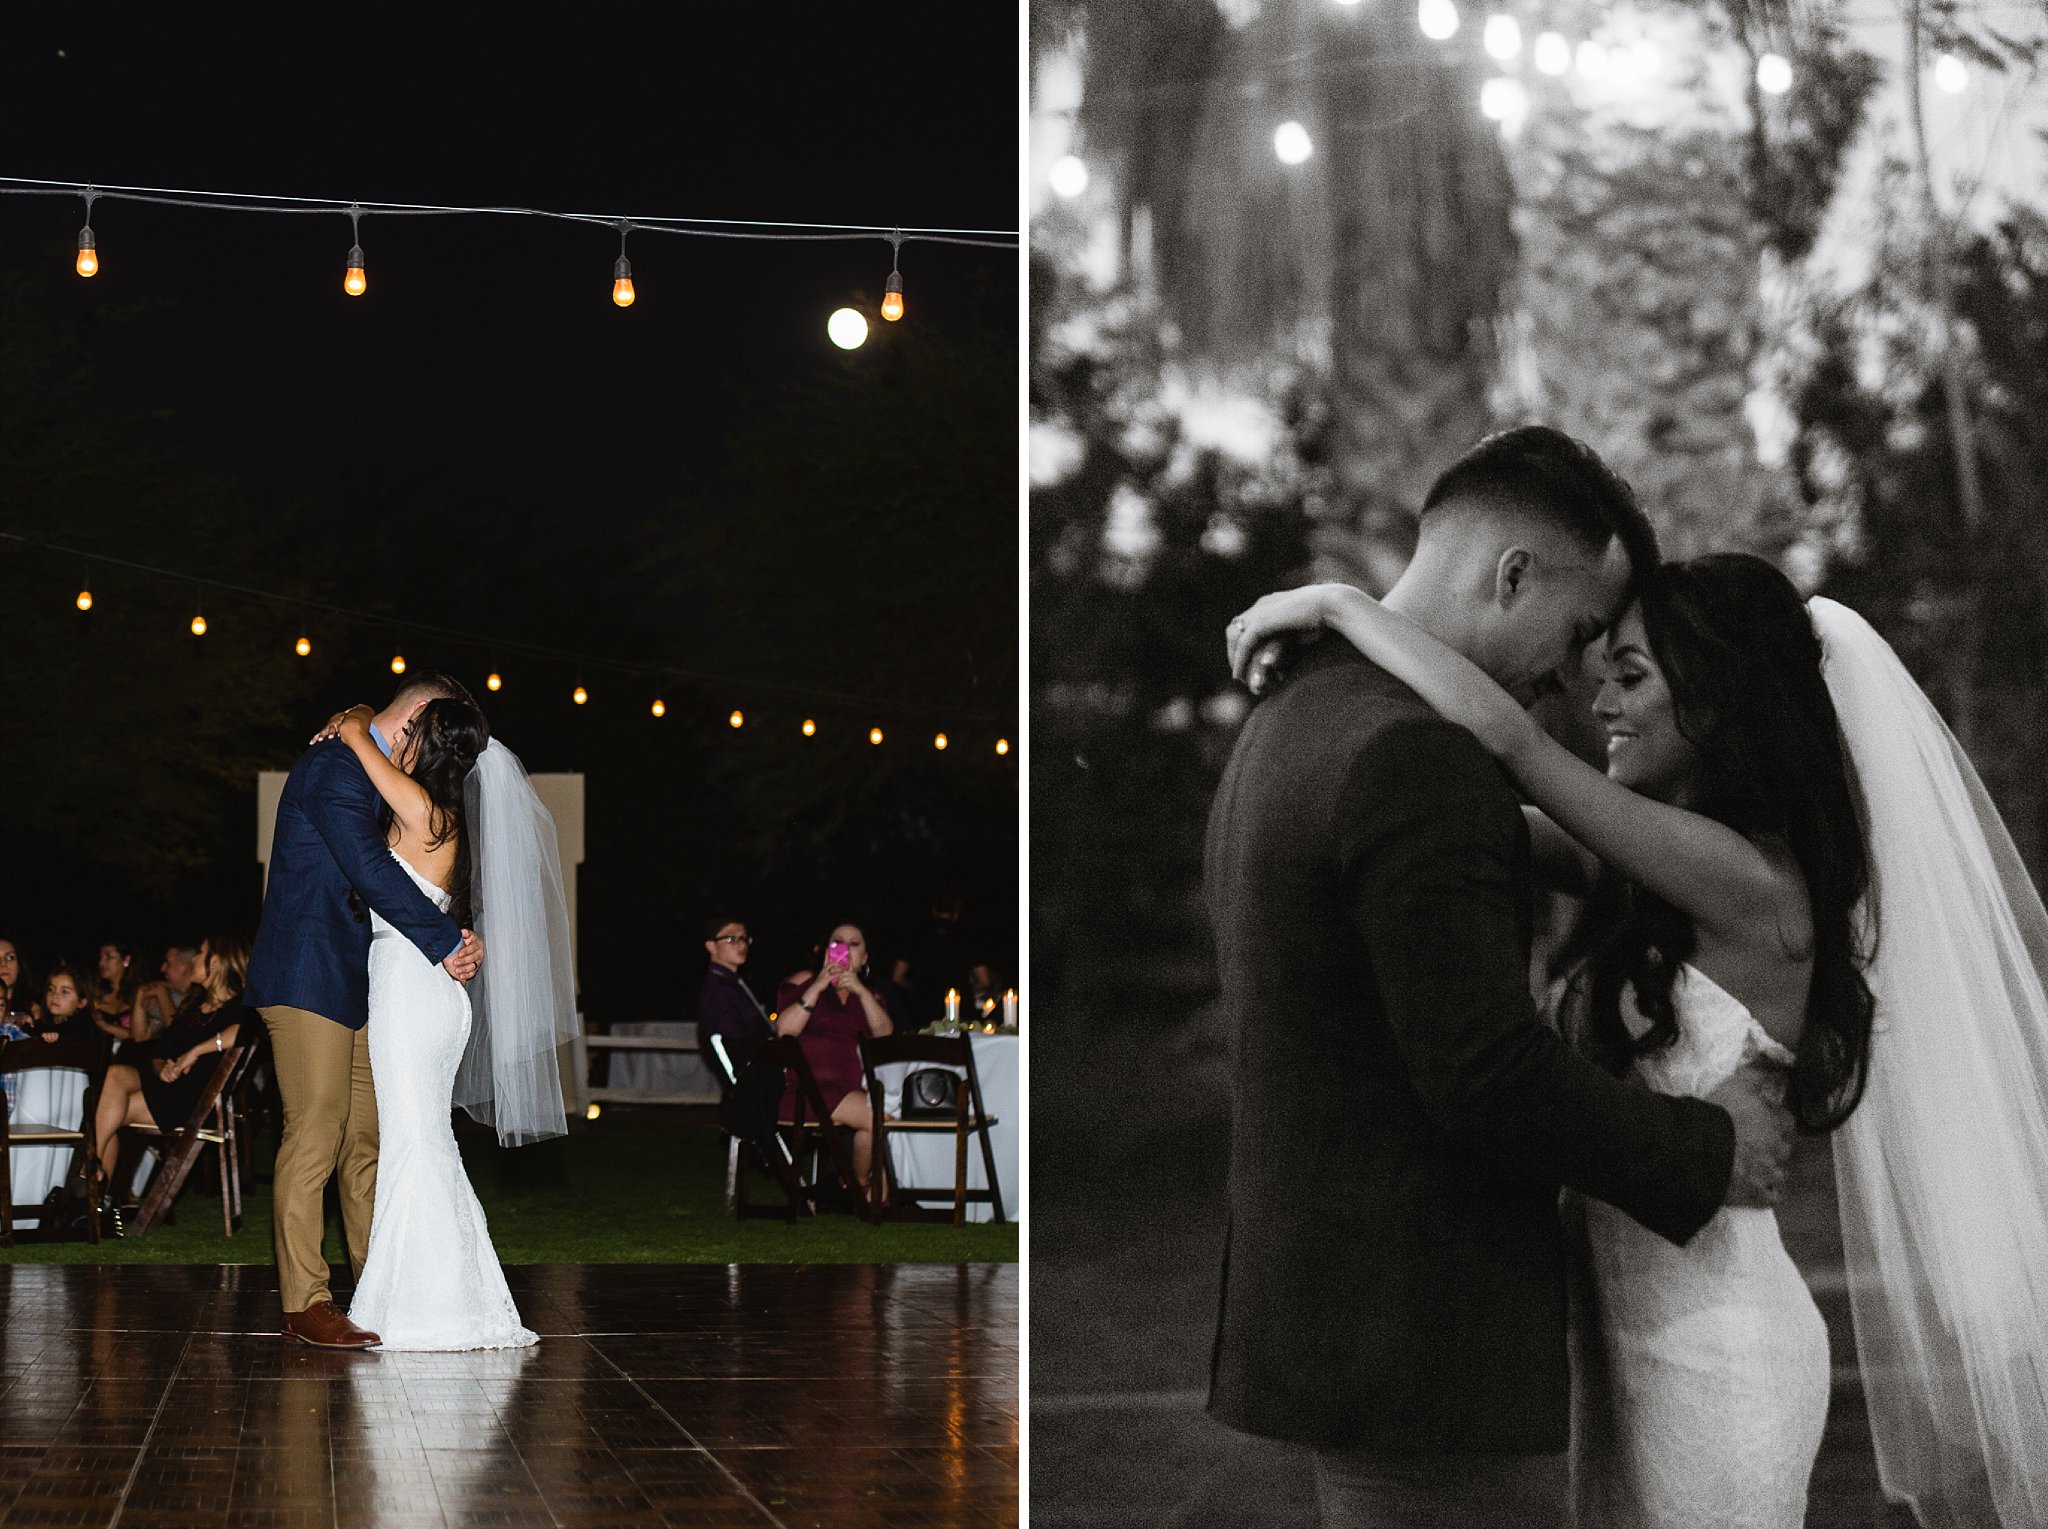 Bride and groom share first dance on dance floor at Legacy Golf Resort in Phoenix, Arizona by PMA Photography